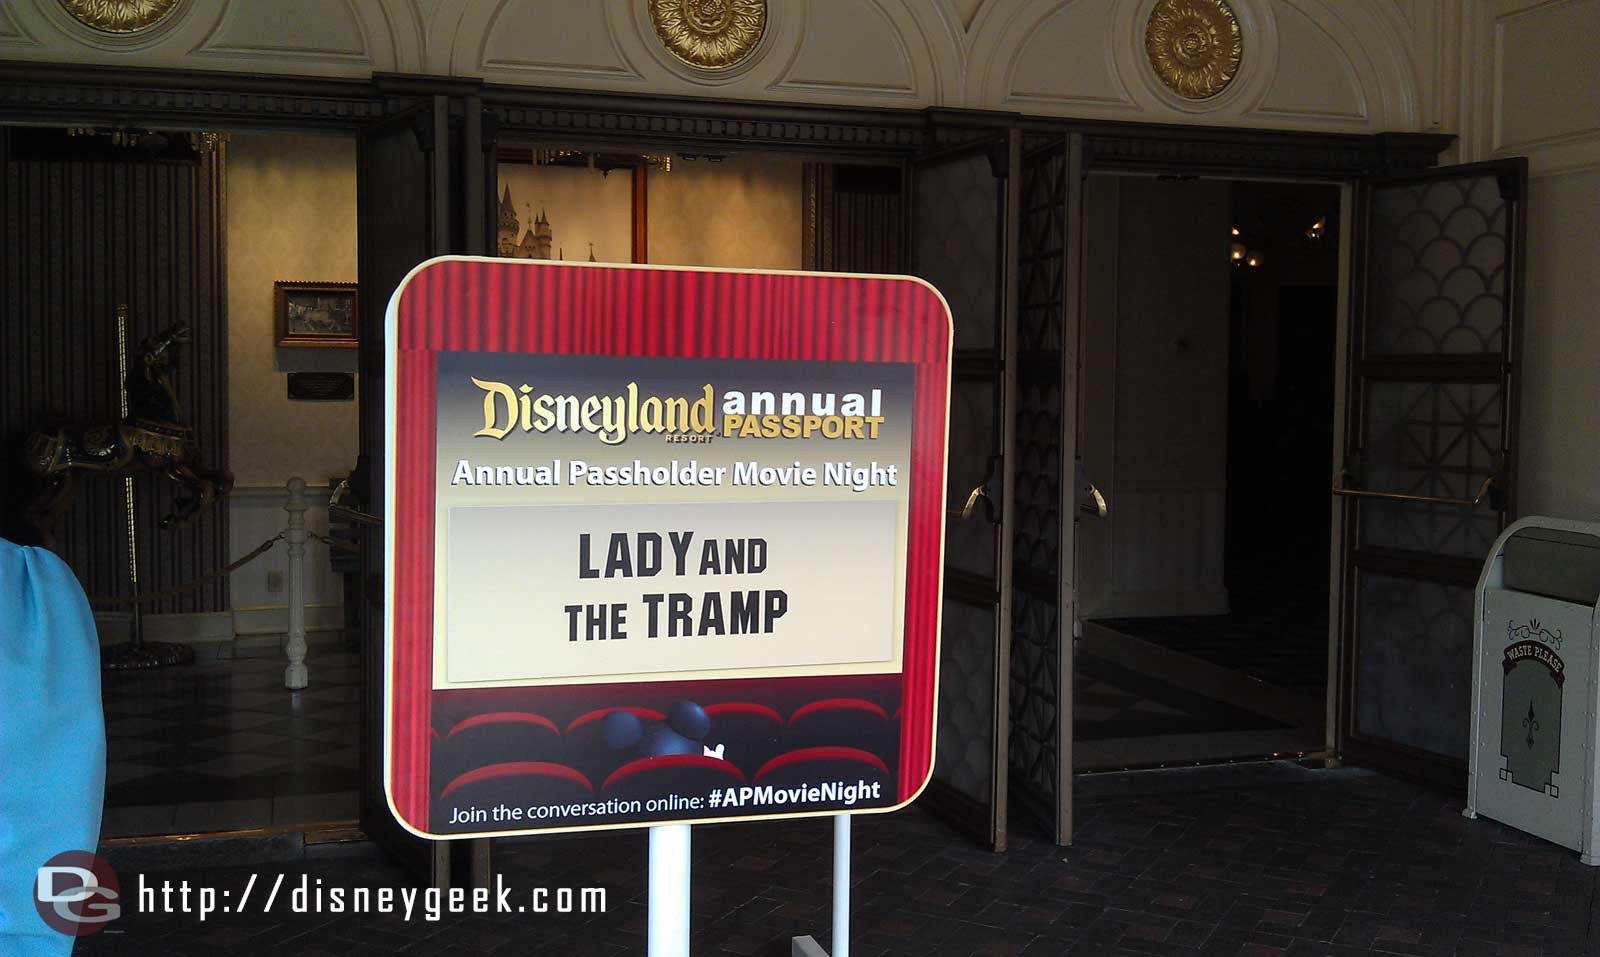 Lady and the Tramp playing in the Main Street Opera House tonight for APMovieNight